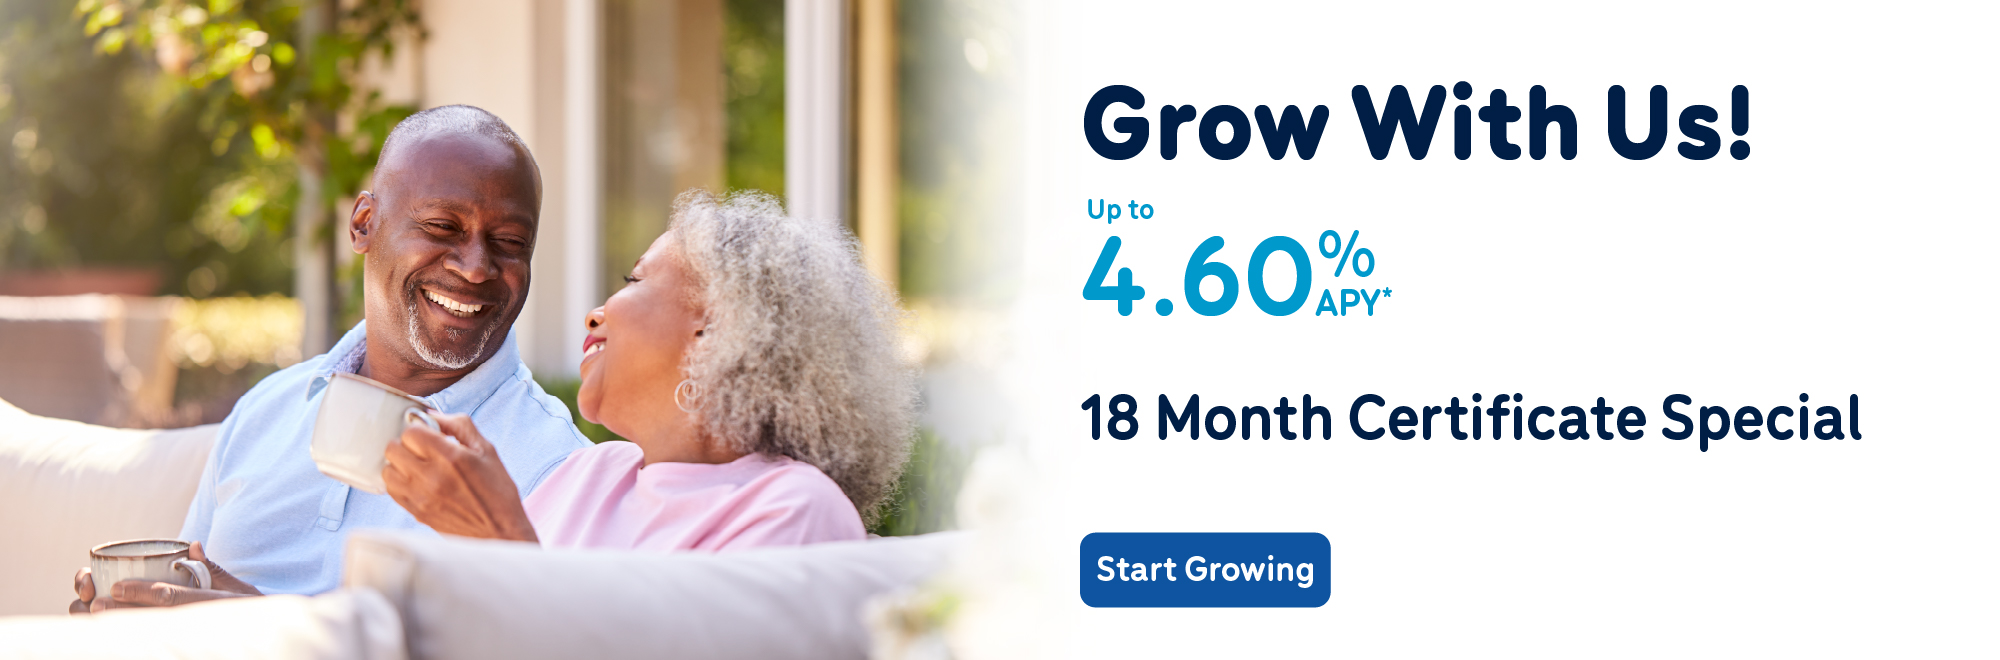 Grow with us using our Certificate Special!